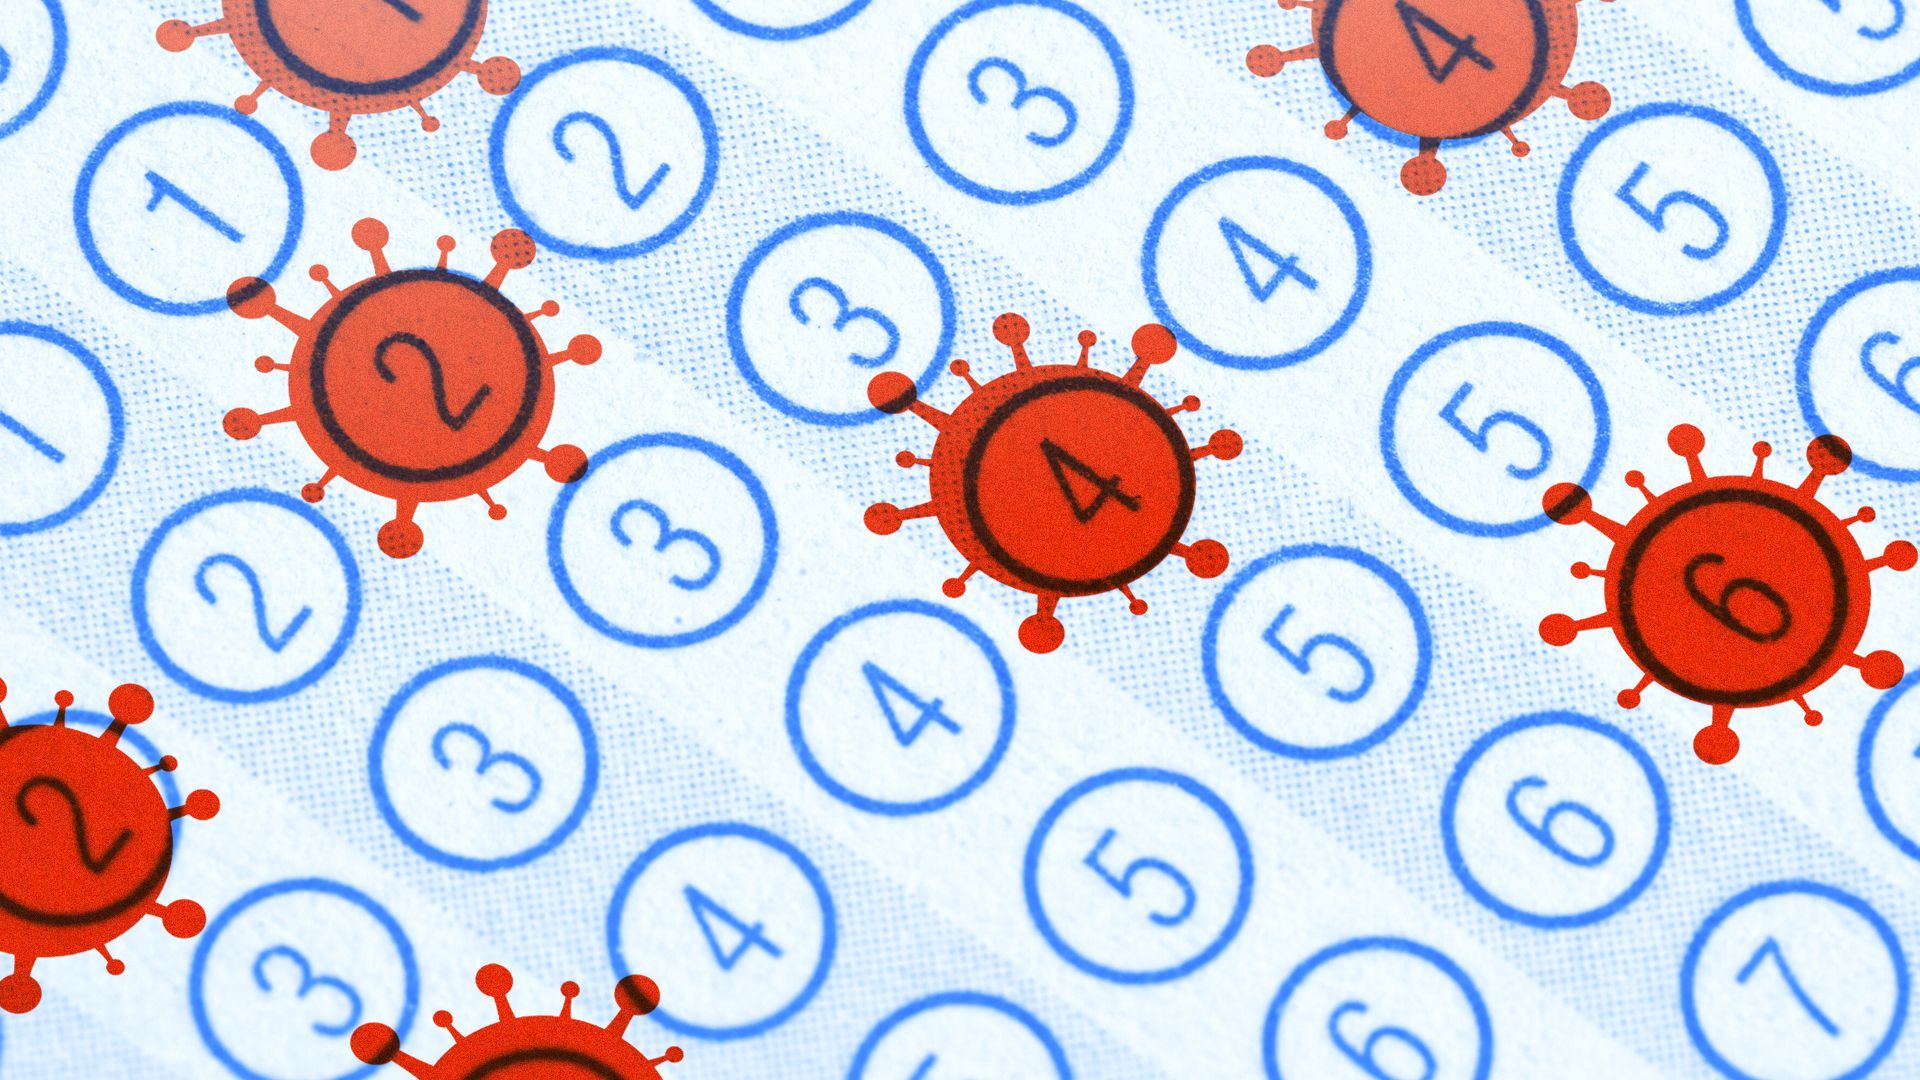 Illustration of a standardized test with answer bubbles filled in with pathogen symbols